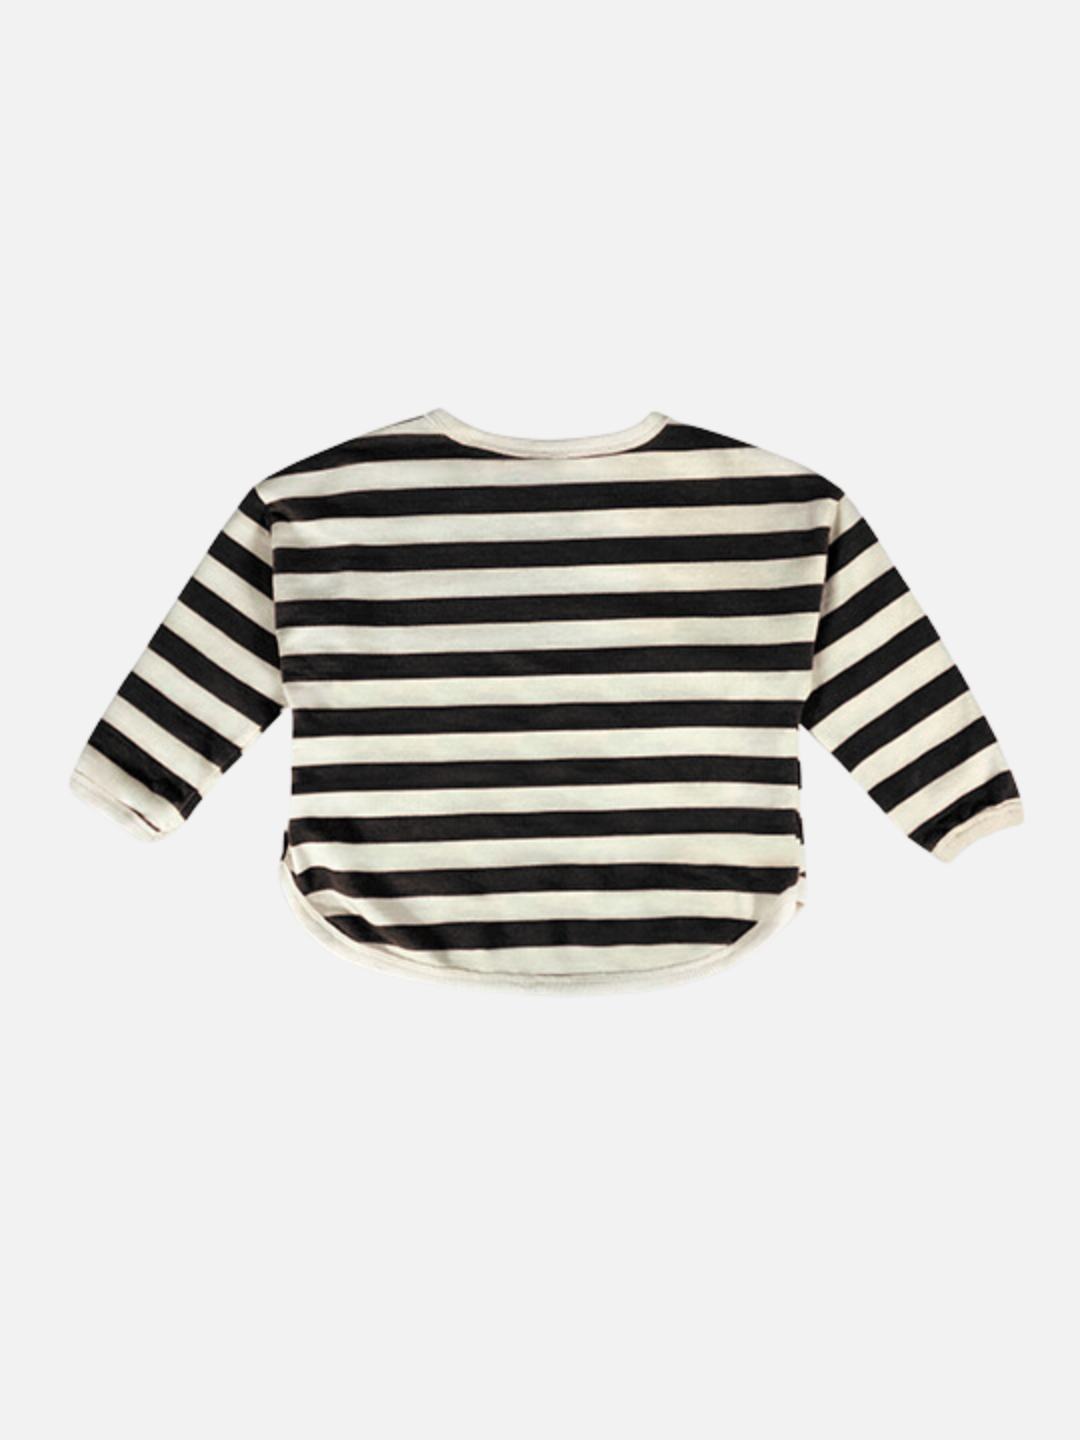 Black | A kids' tee shirt with a curved hem in black and white stripes, back view